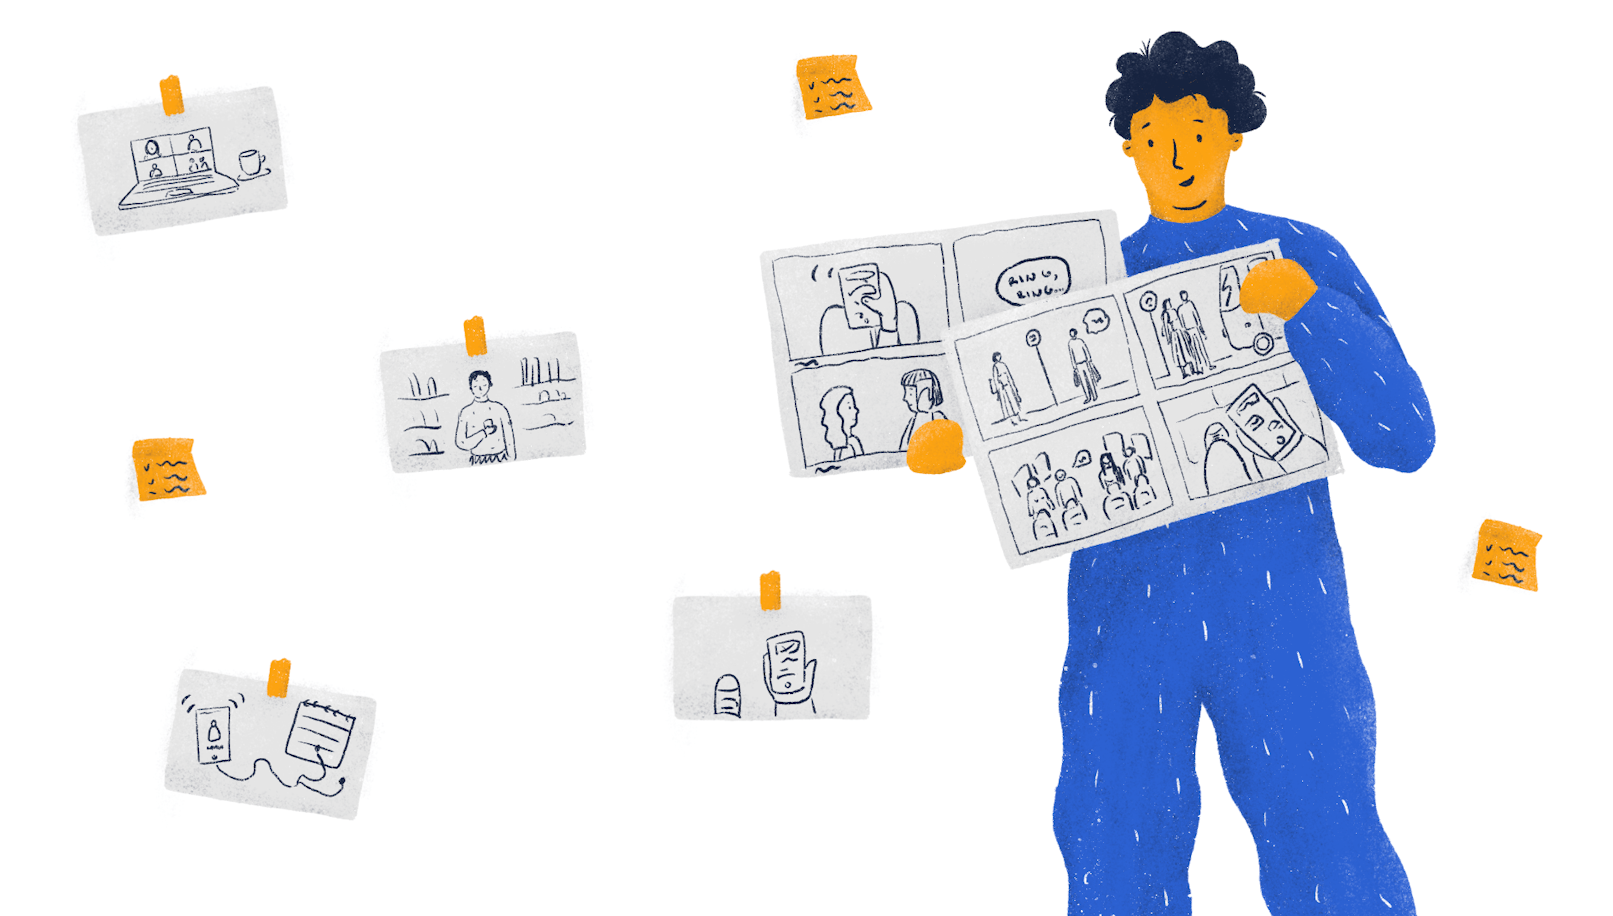 Storyboarding: Communicating UX Insights in a Humane Way